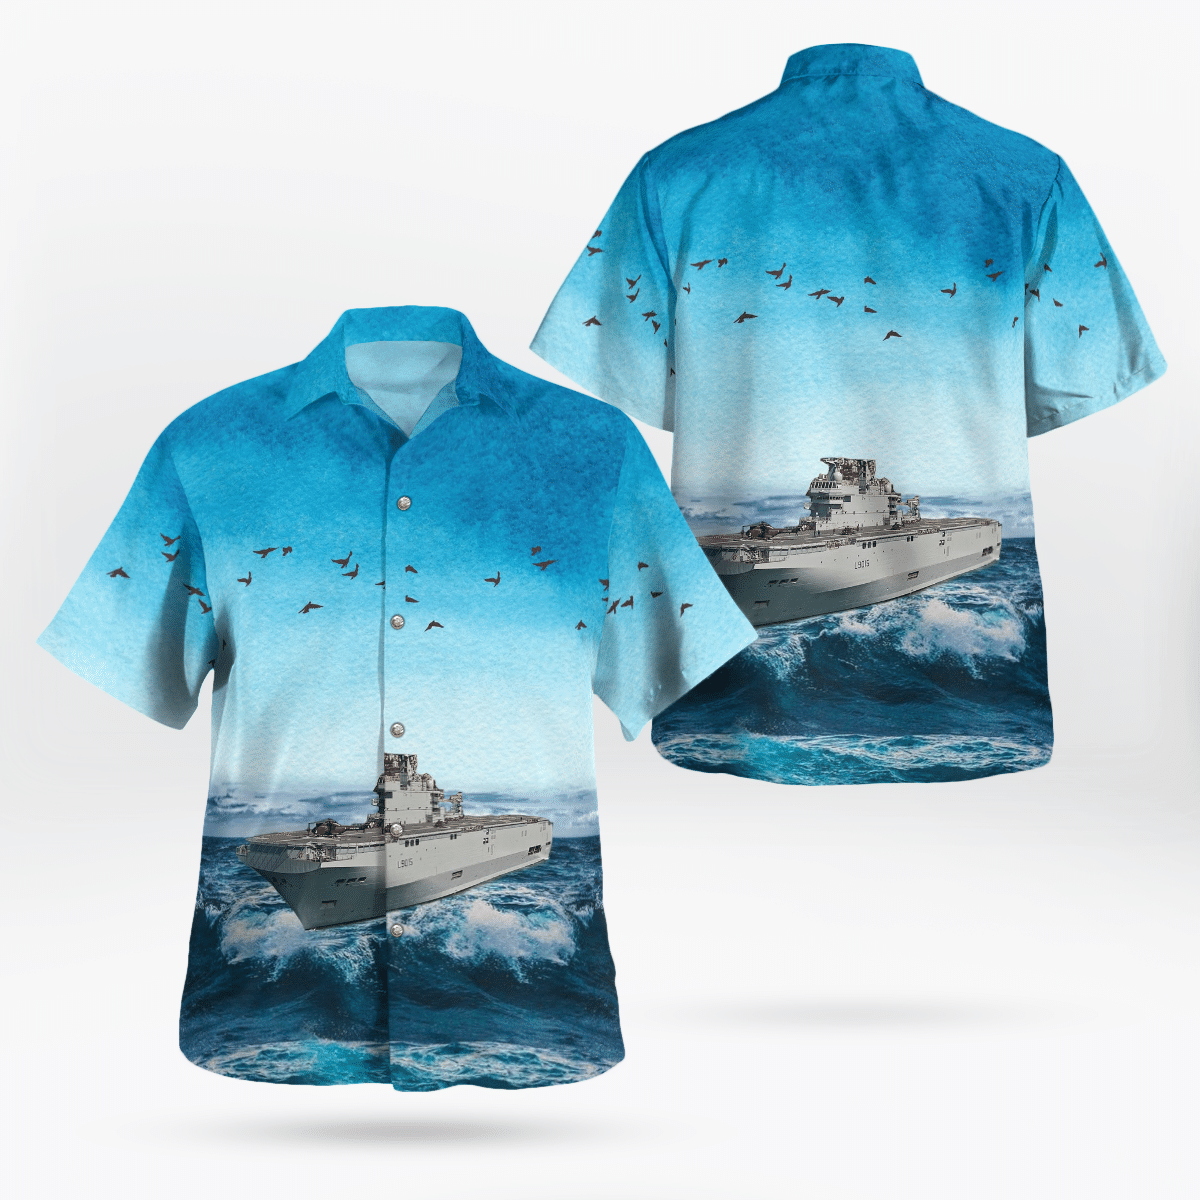 Some cool 3d hawaii shirt for this summer 13